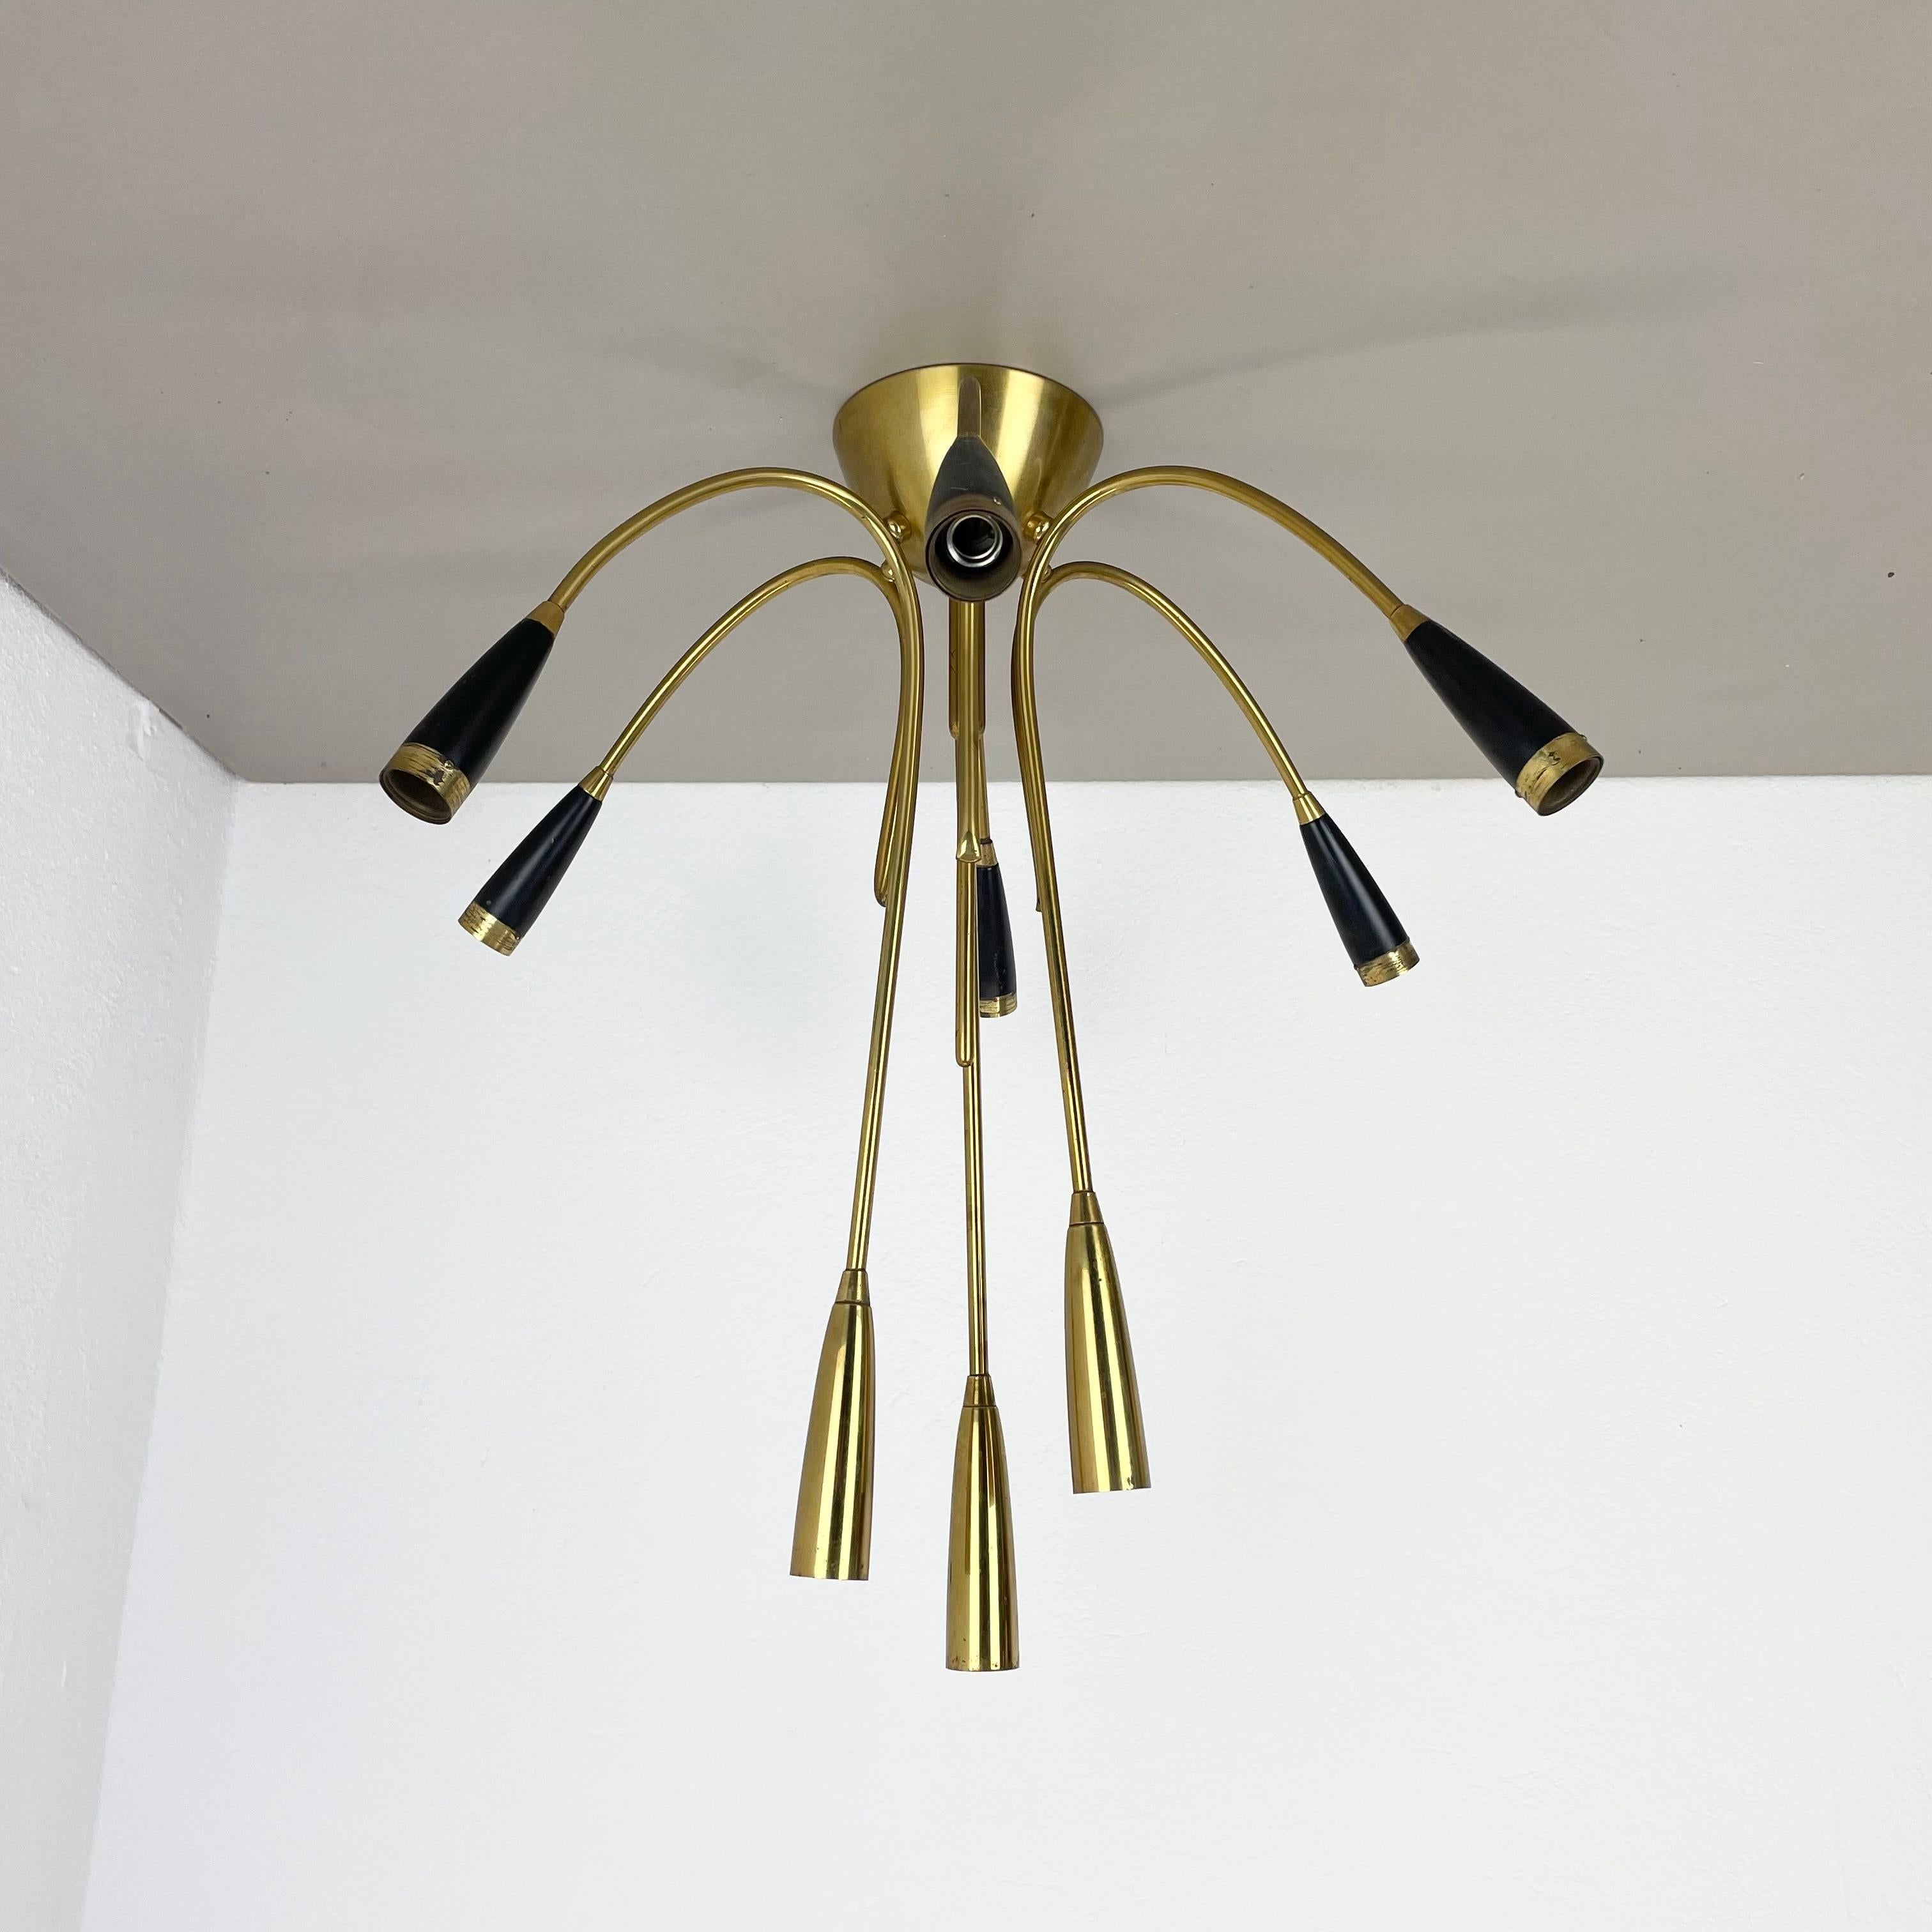 Article:

brass ceiling light, flush mount



Origin:

Italy



Age:

1950s



This vintage modernist light was produced in the 1950s in Italy. The lights is made of metal and solid brass with 9 huge light arms with bulb sockets on the ends. the